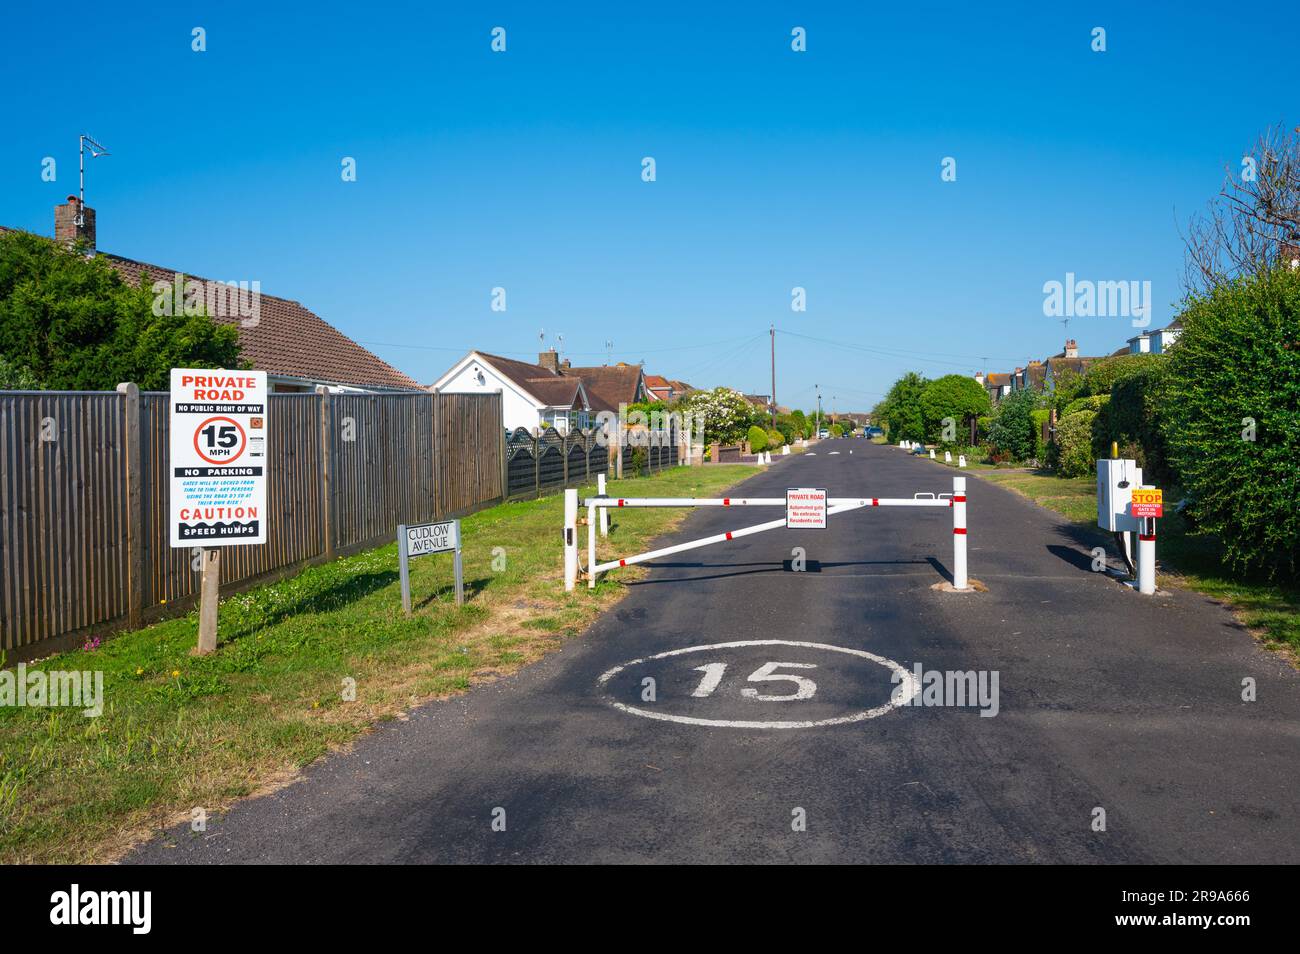 Gated entrance with closed gate to a private road with 15MPH speed limit at Cudlow Avenue, Rustington, West Sussex, England, UK. Stock Photo